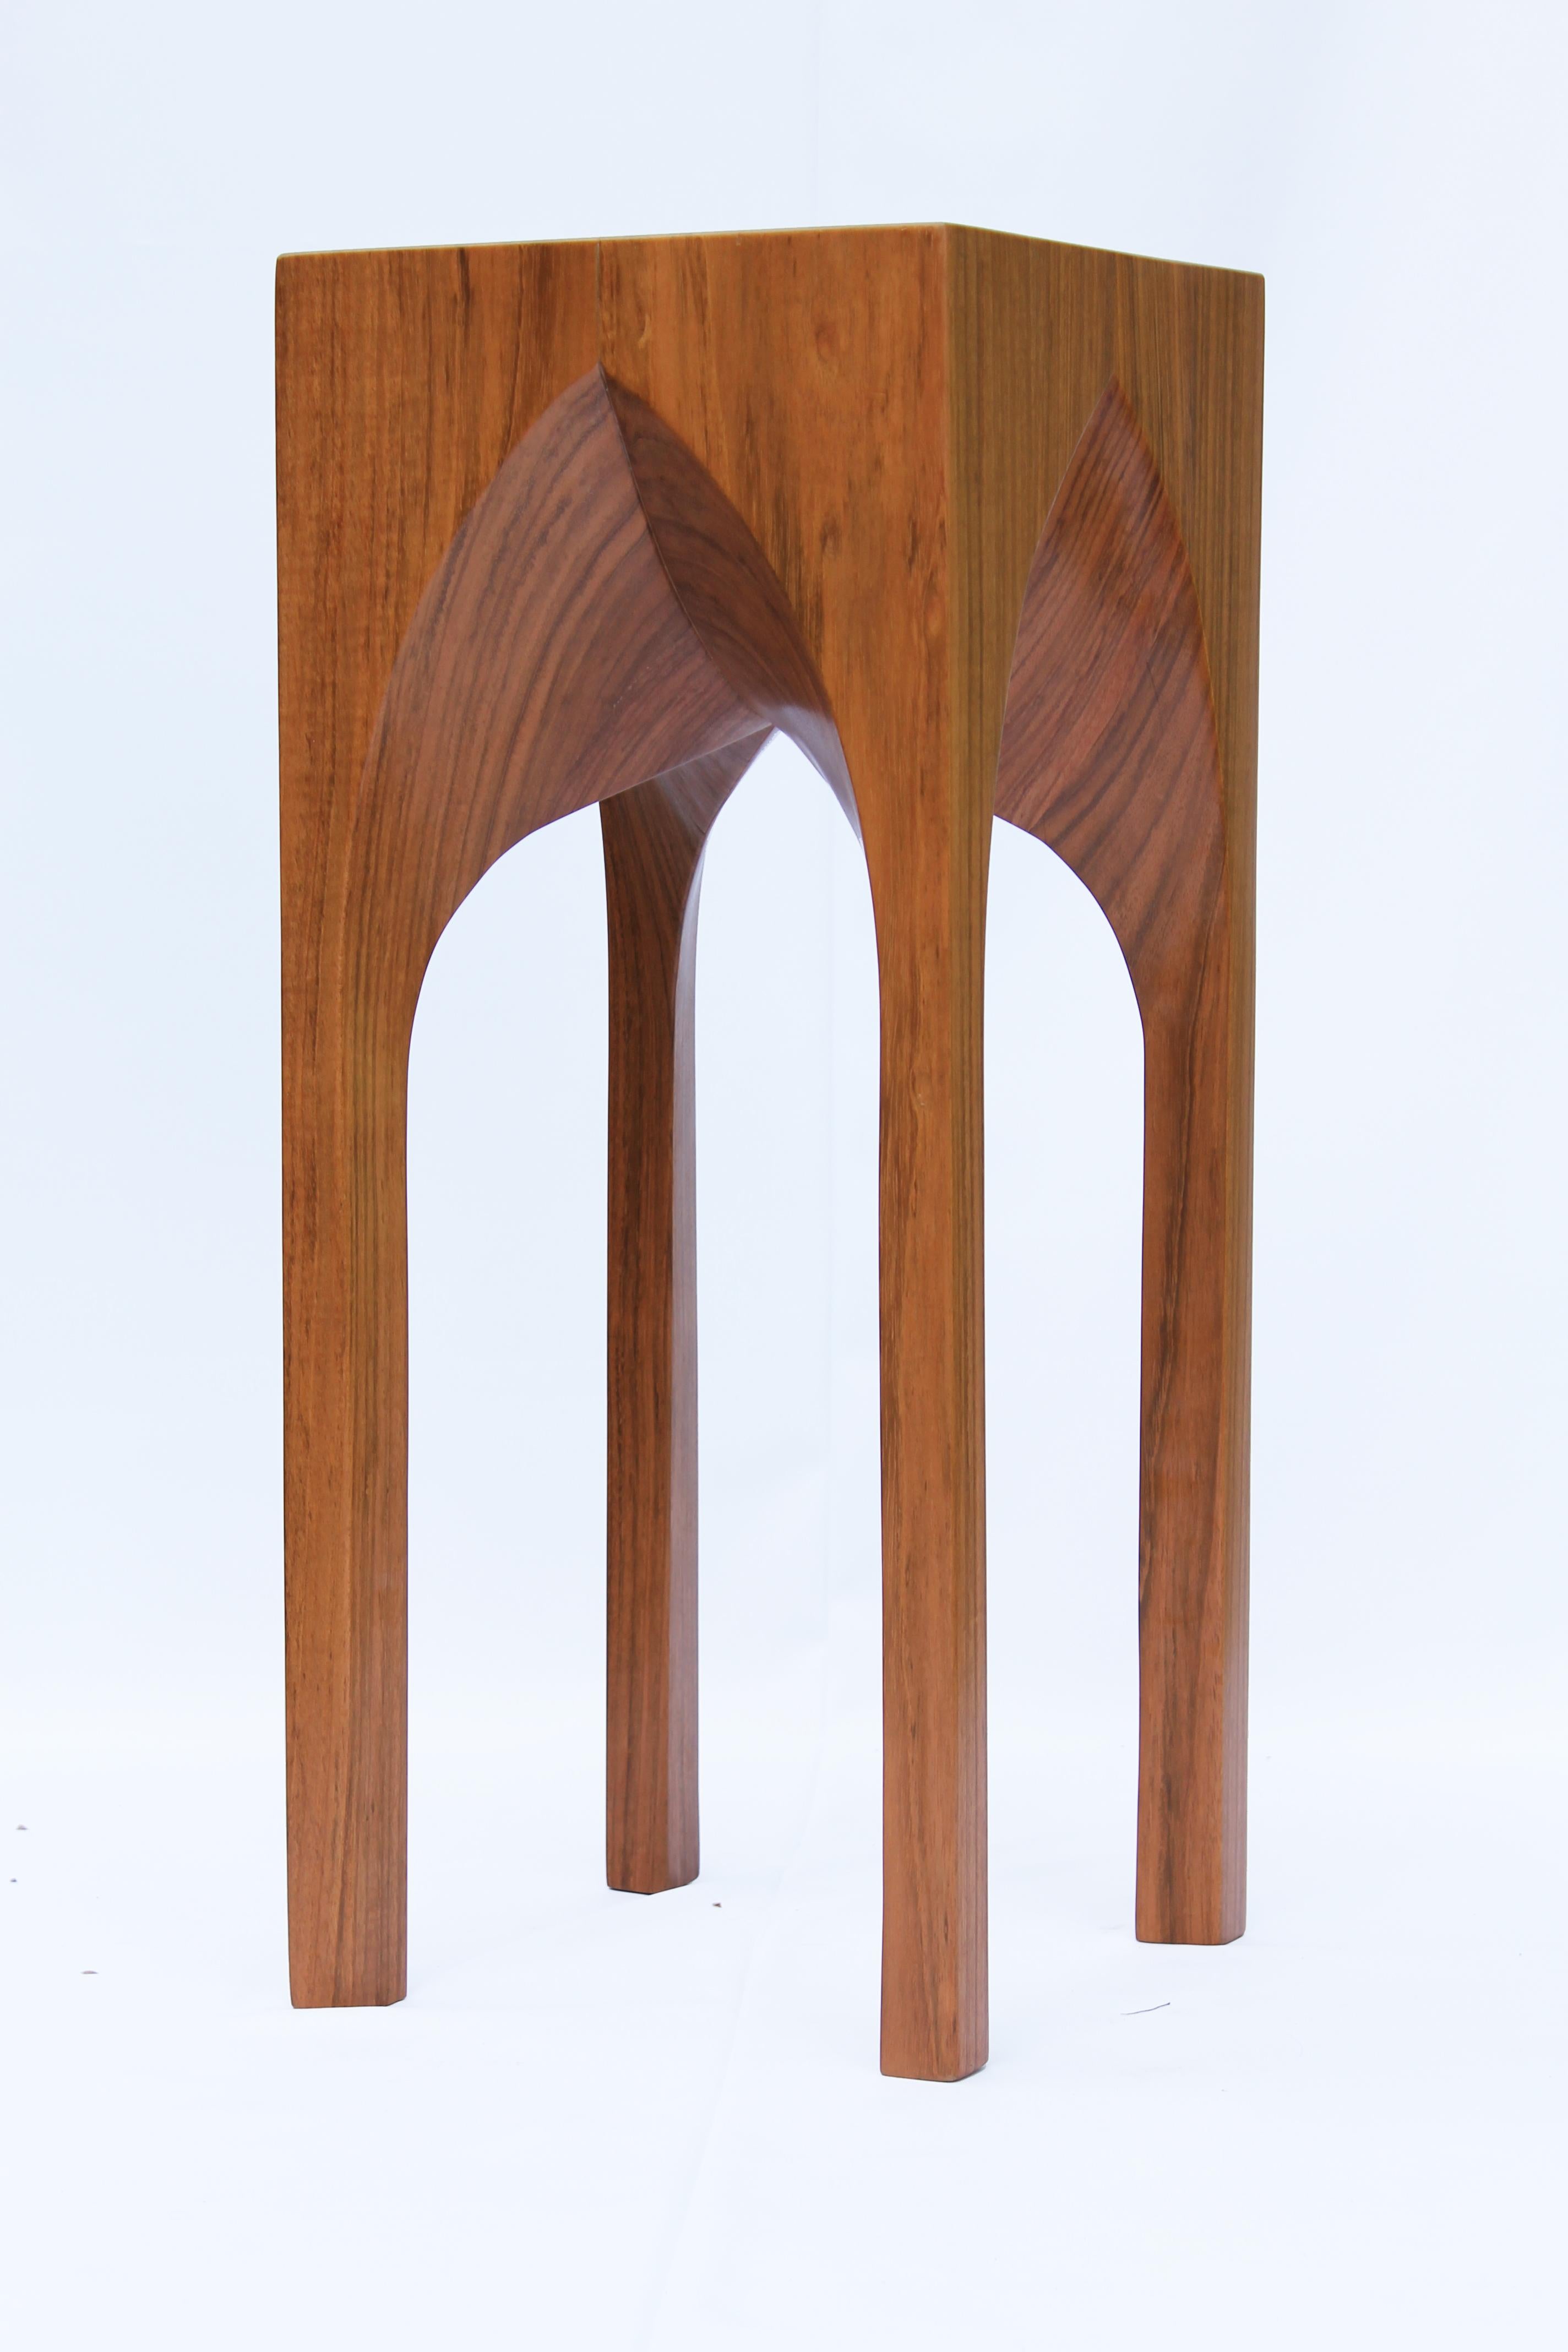 Brazilian Arch Side Table - Pointed Arch (Jatobá wood) For Sale